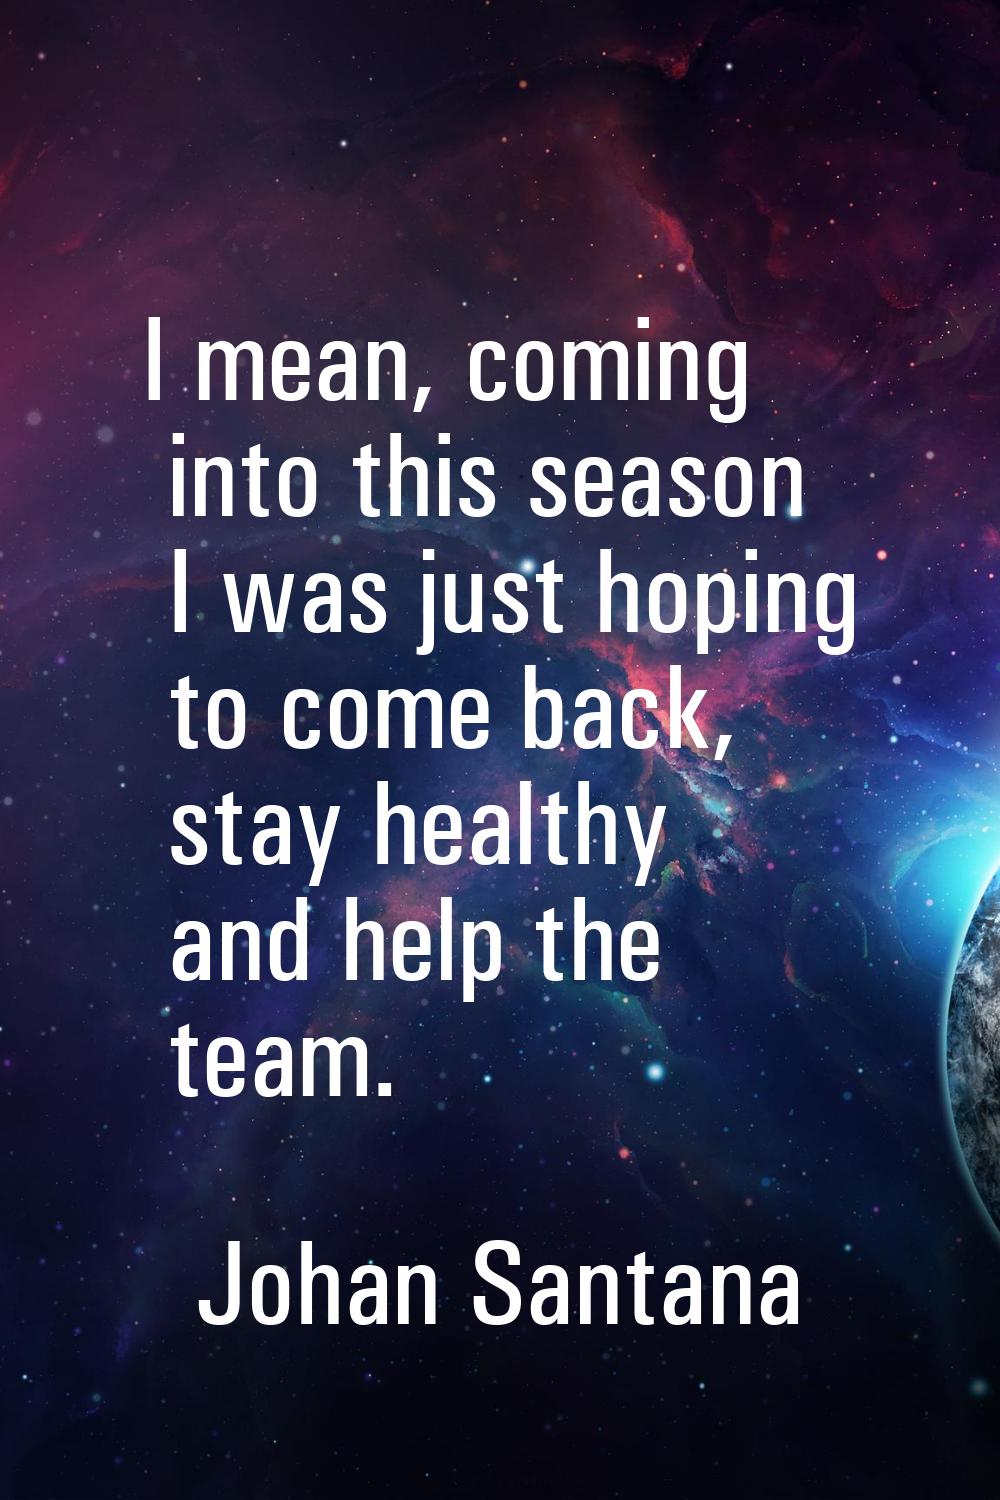 I mean, coming into this season I was just hoping to come back, stay healthy and help the team.